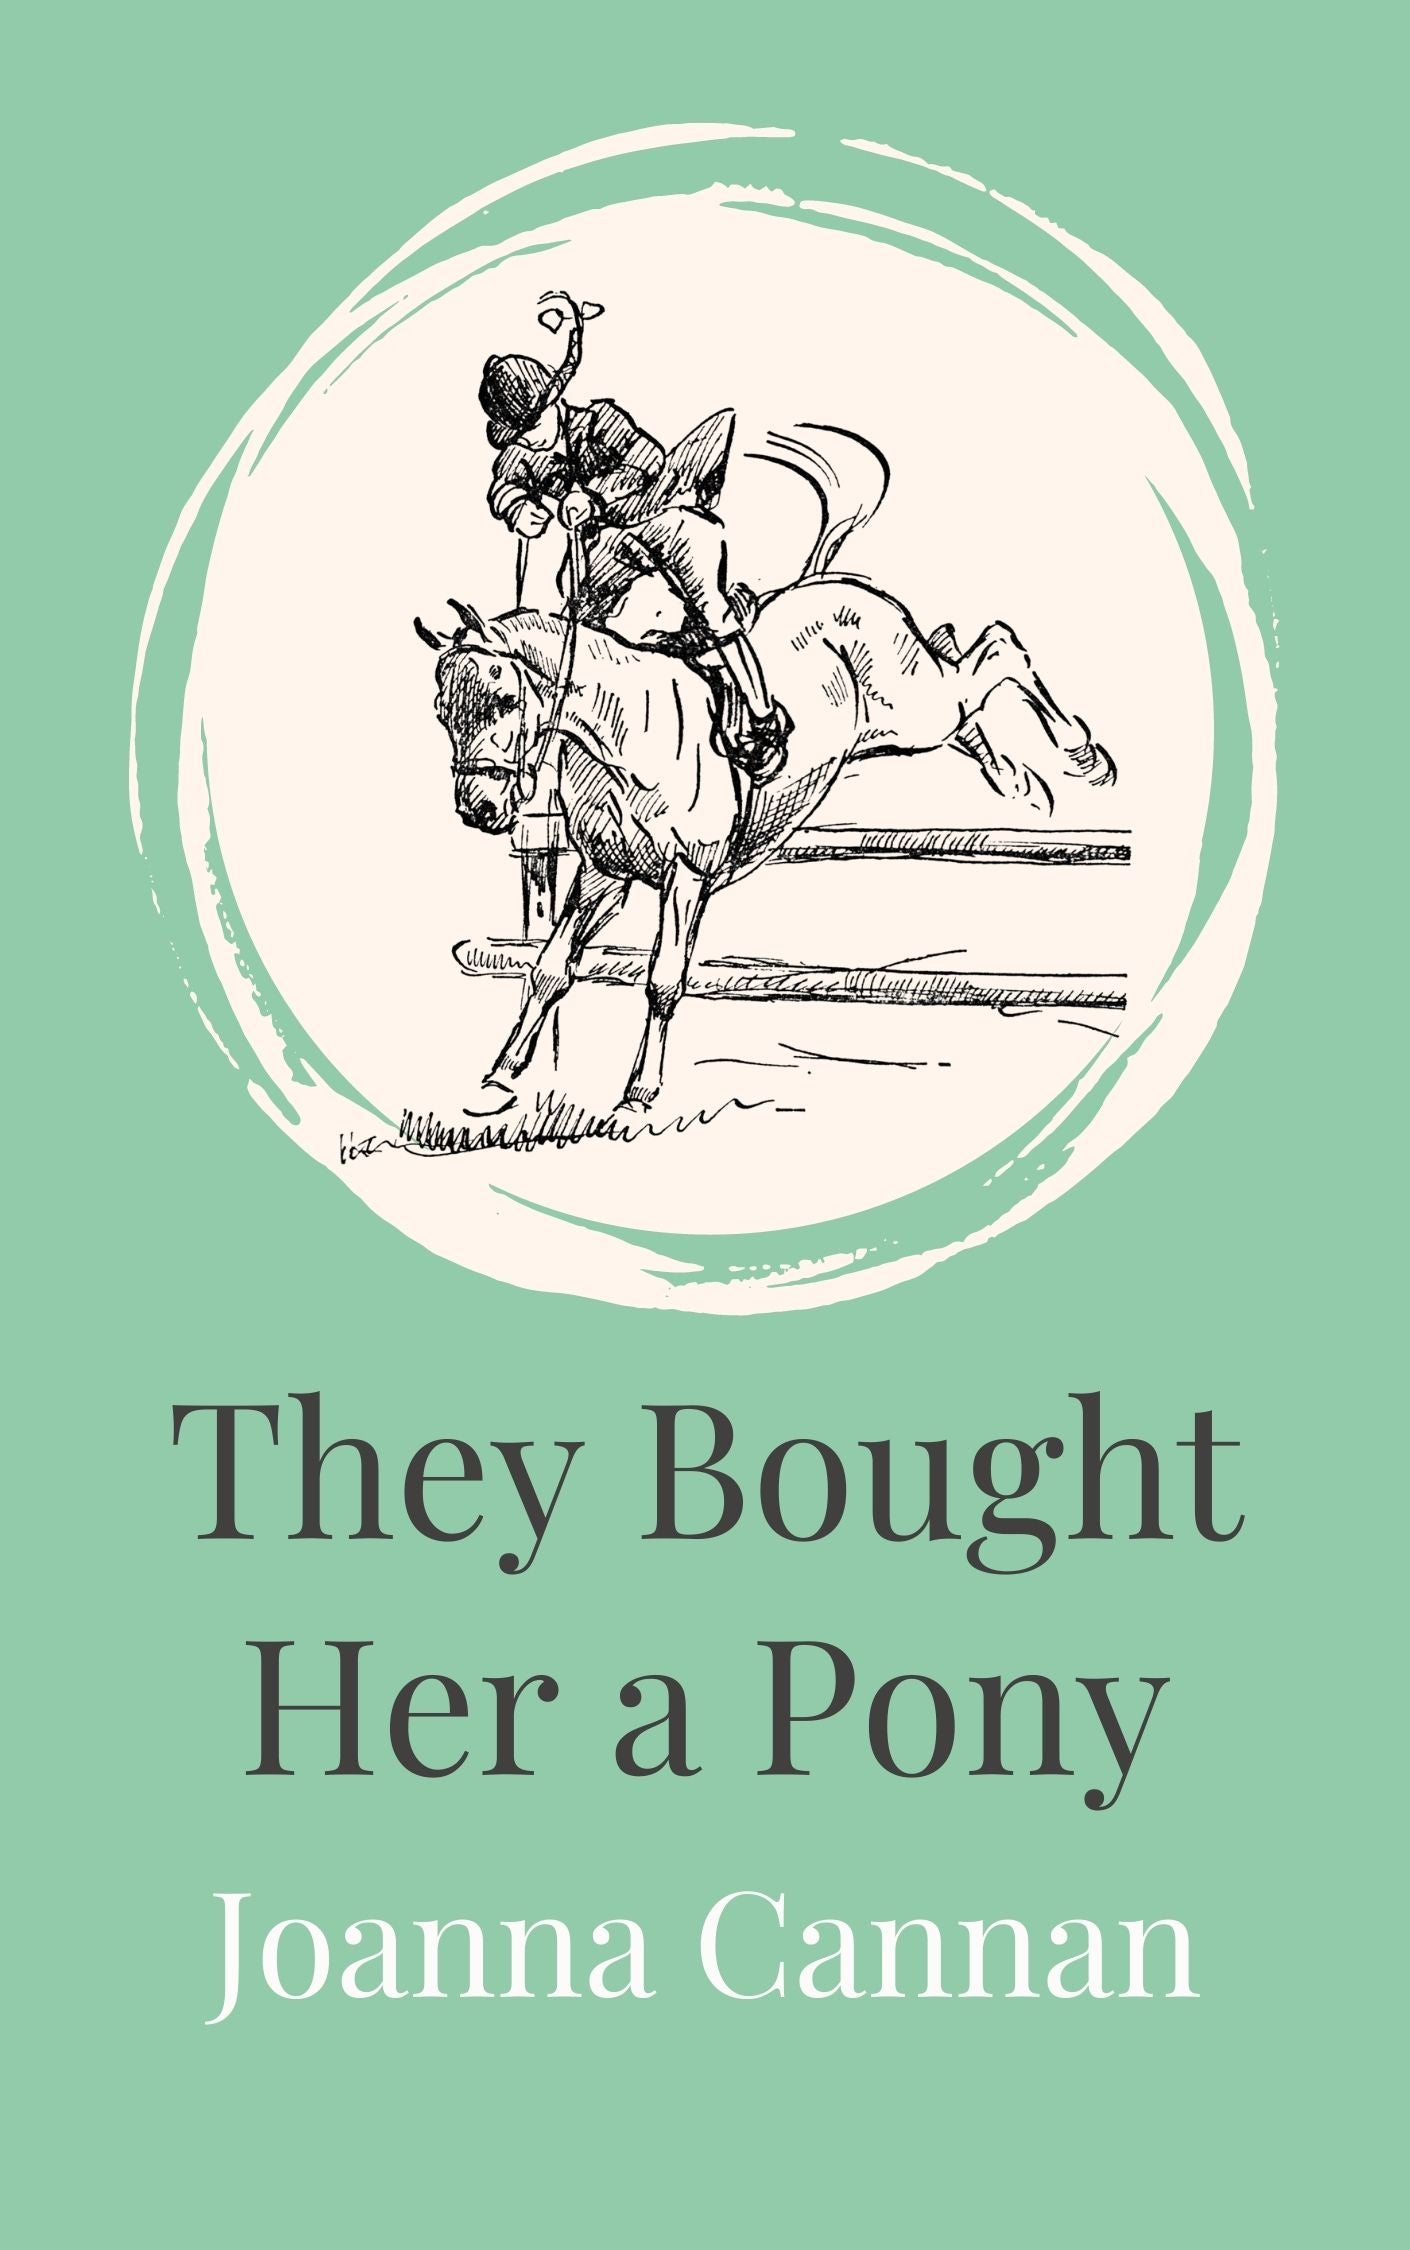 Joanna Cannan: They Bought Her a Pony  (eBook)